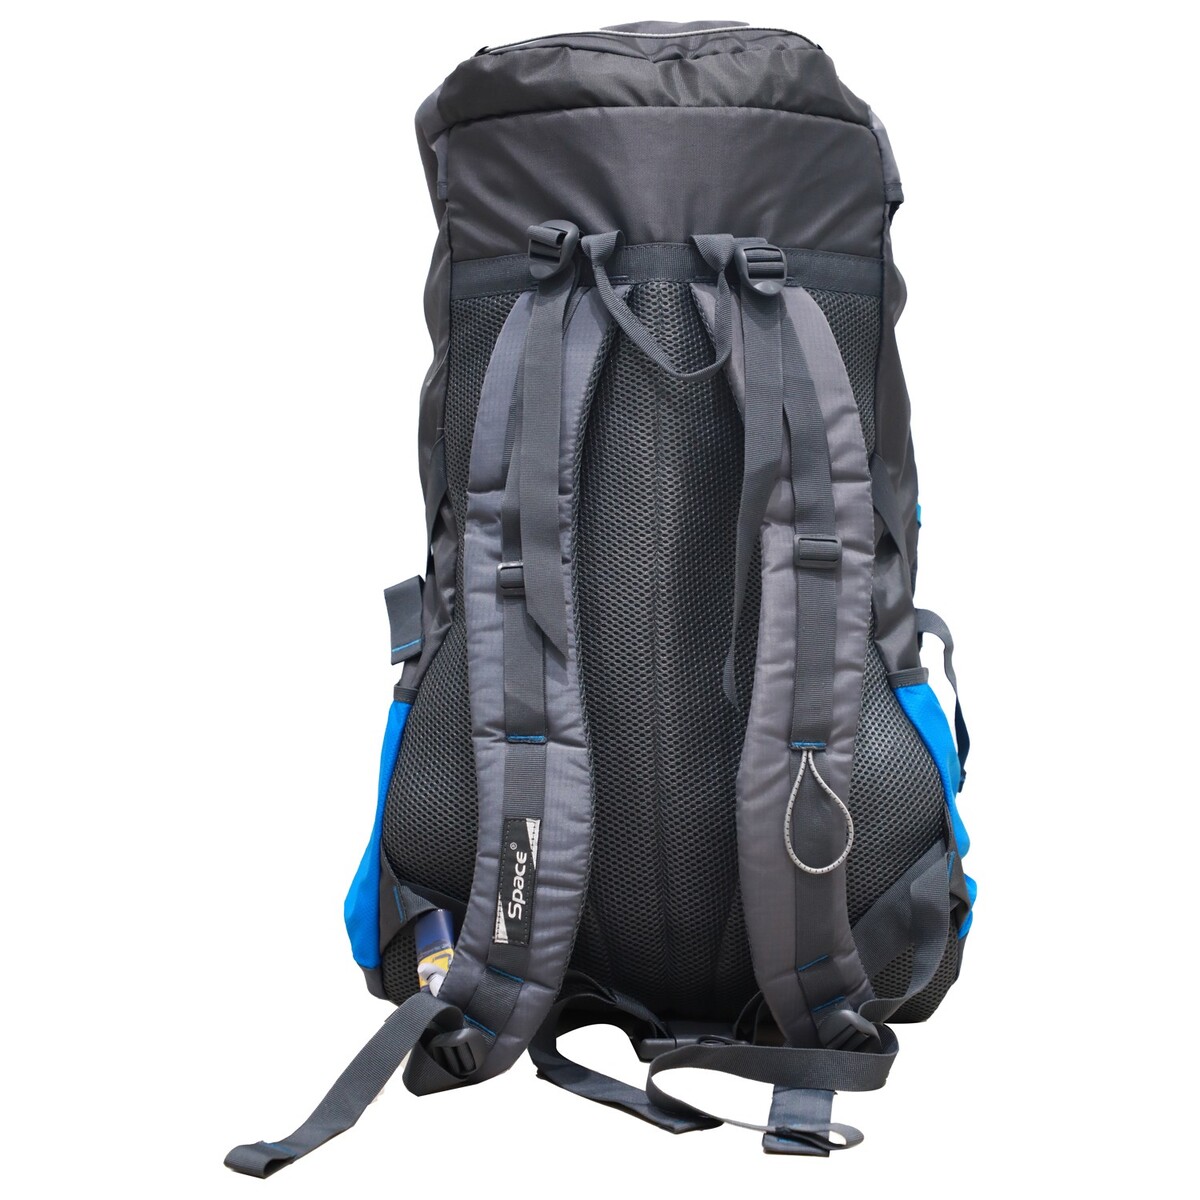 Space Backpack Camping Adventure 65cm